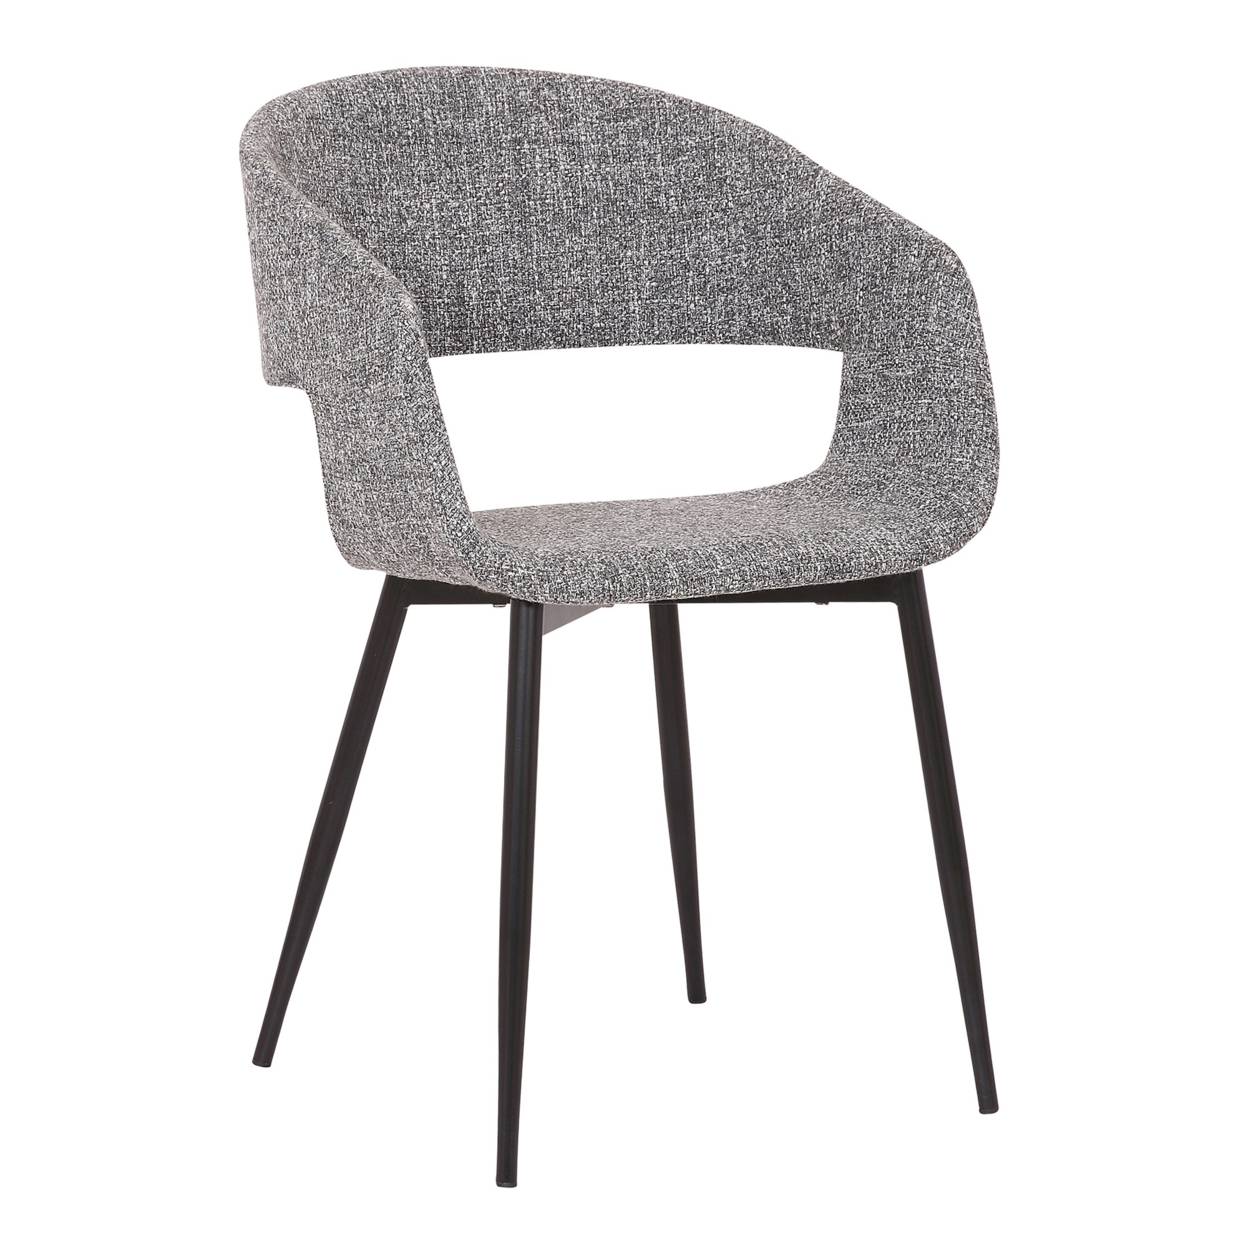 Upholstered Open Back Dining Accent Chair With Metal Angled Legs, Gray- Saltoro Sherpi